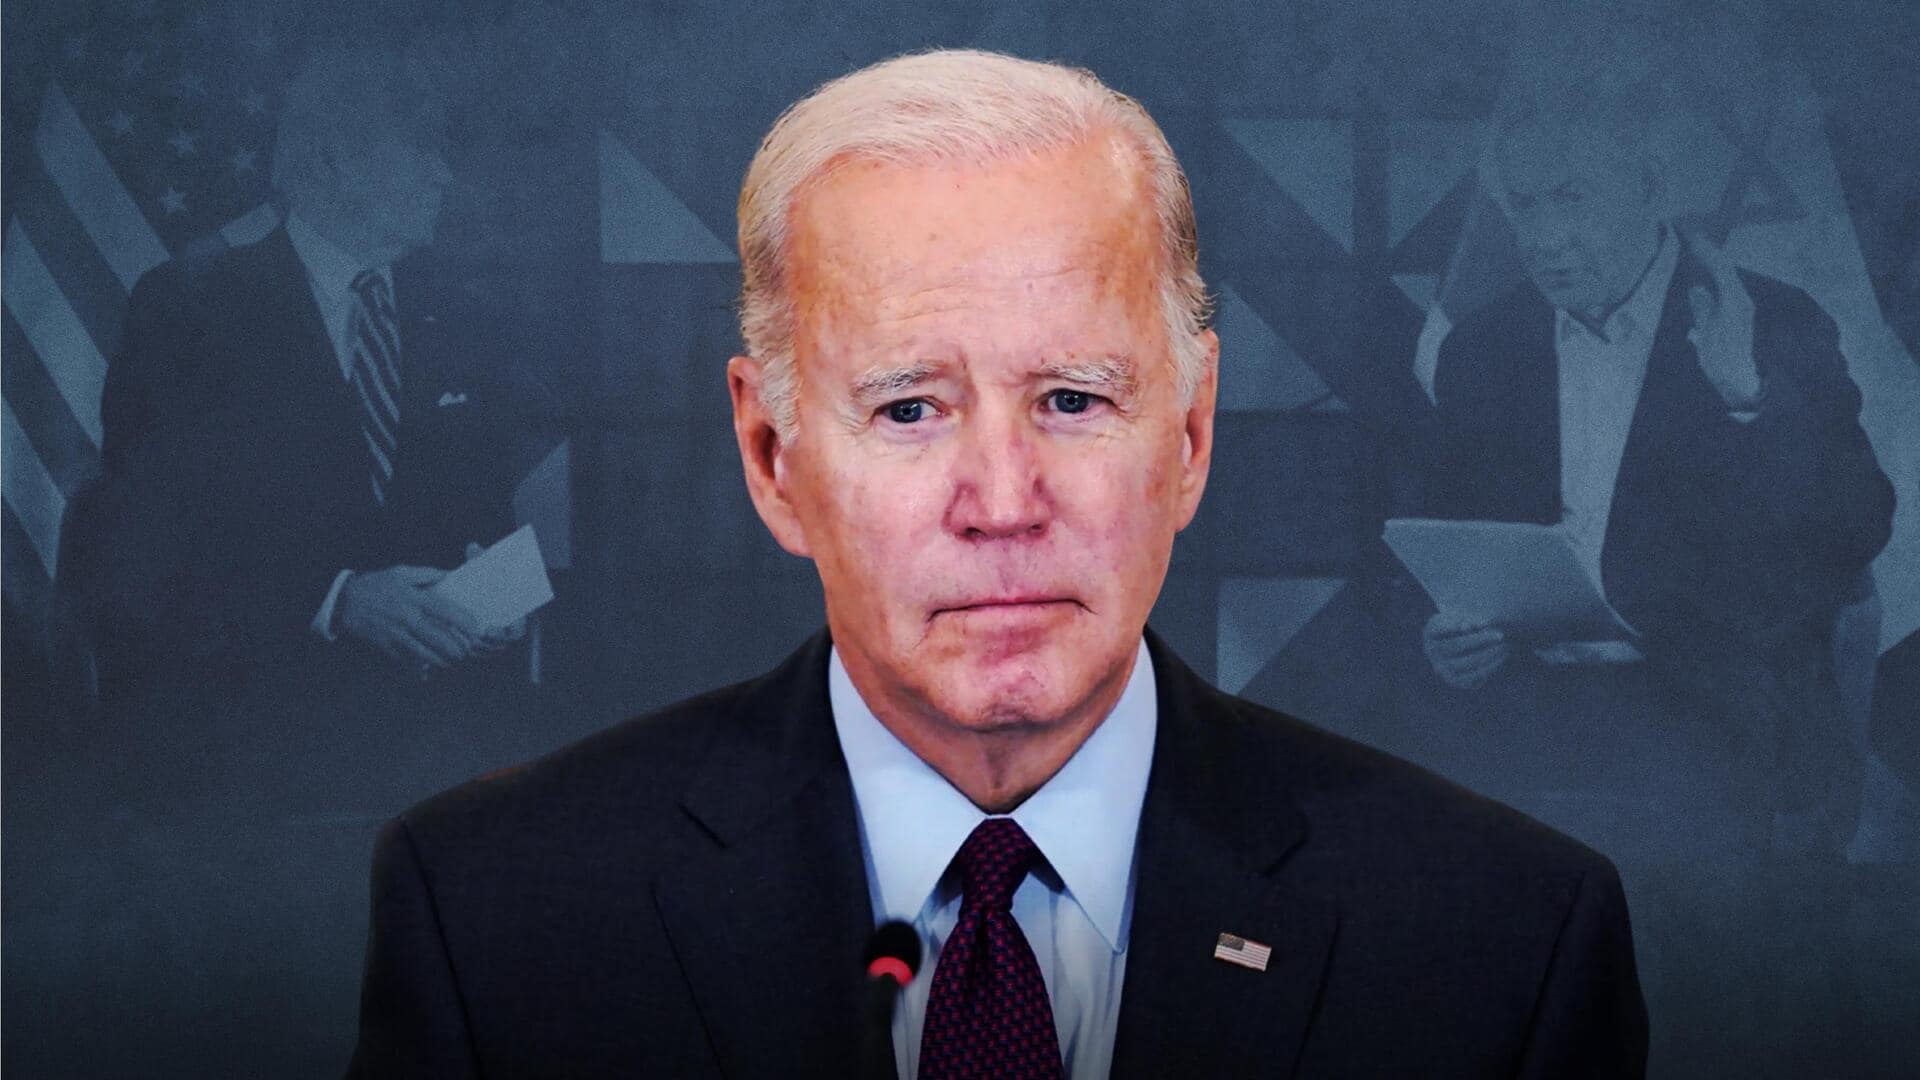 Biden 'hopes' for ceasefire in Israel-Hamas conflict by 'next Monday'